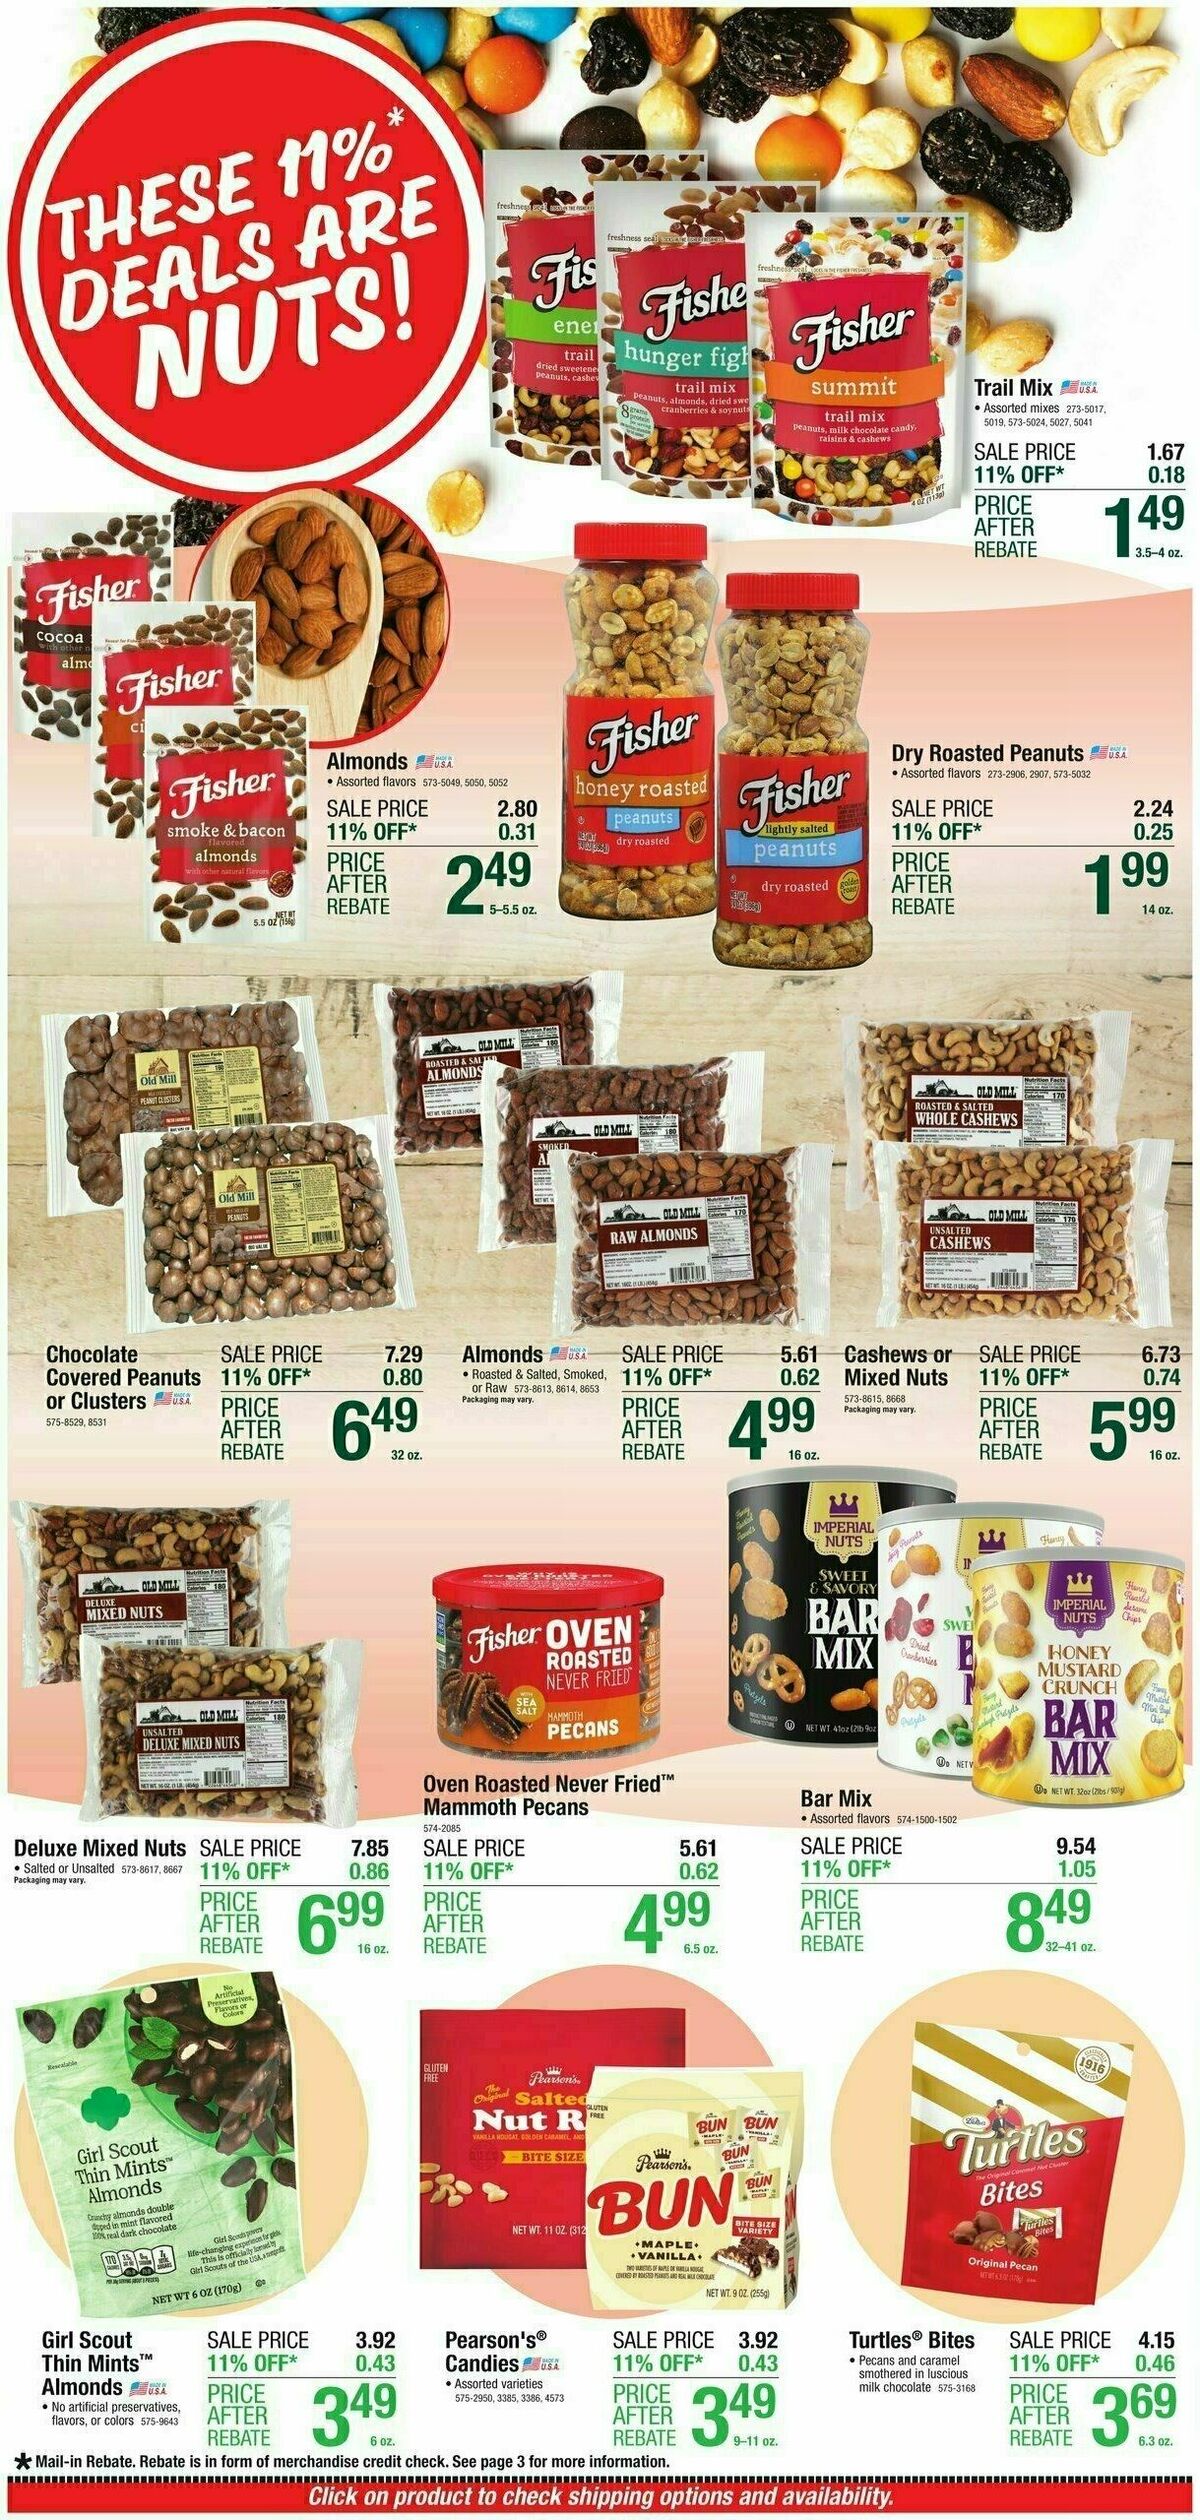 Menards Home Essentials Weekly Ad from September 13